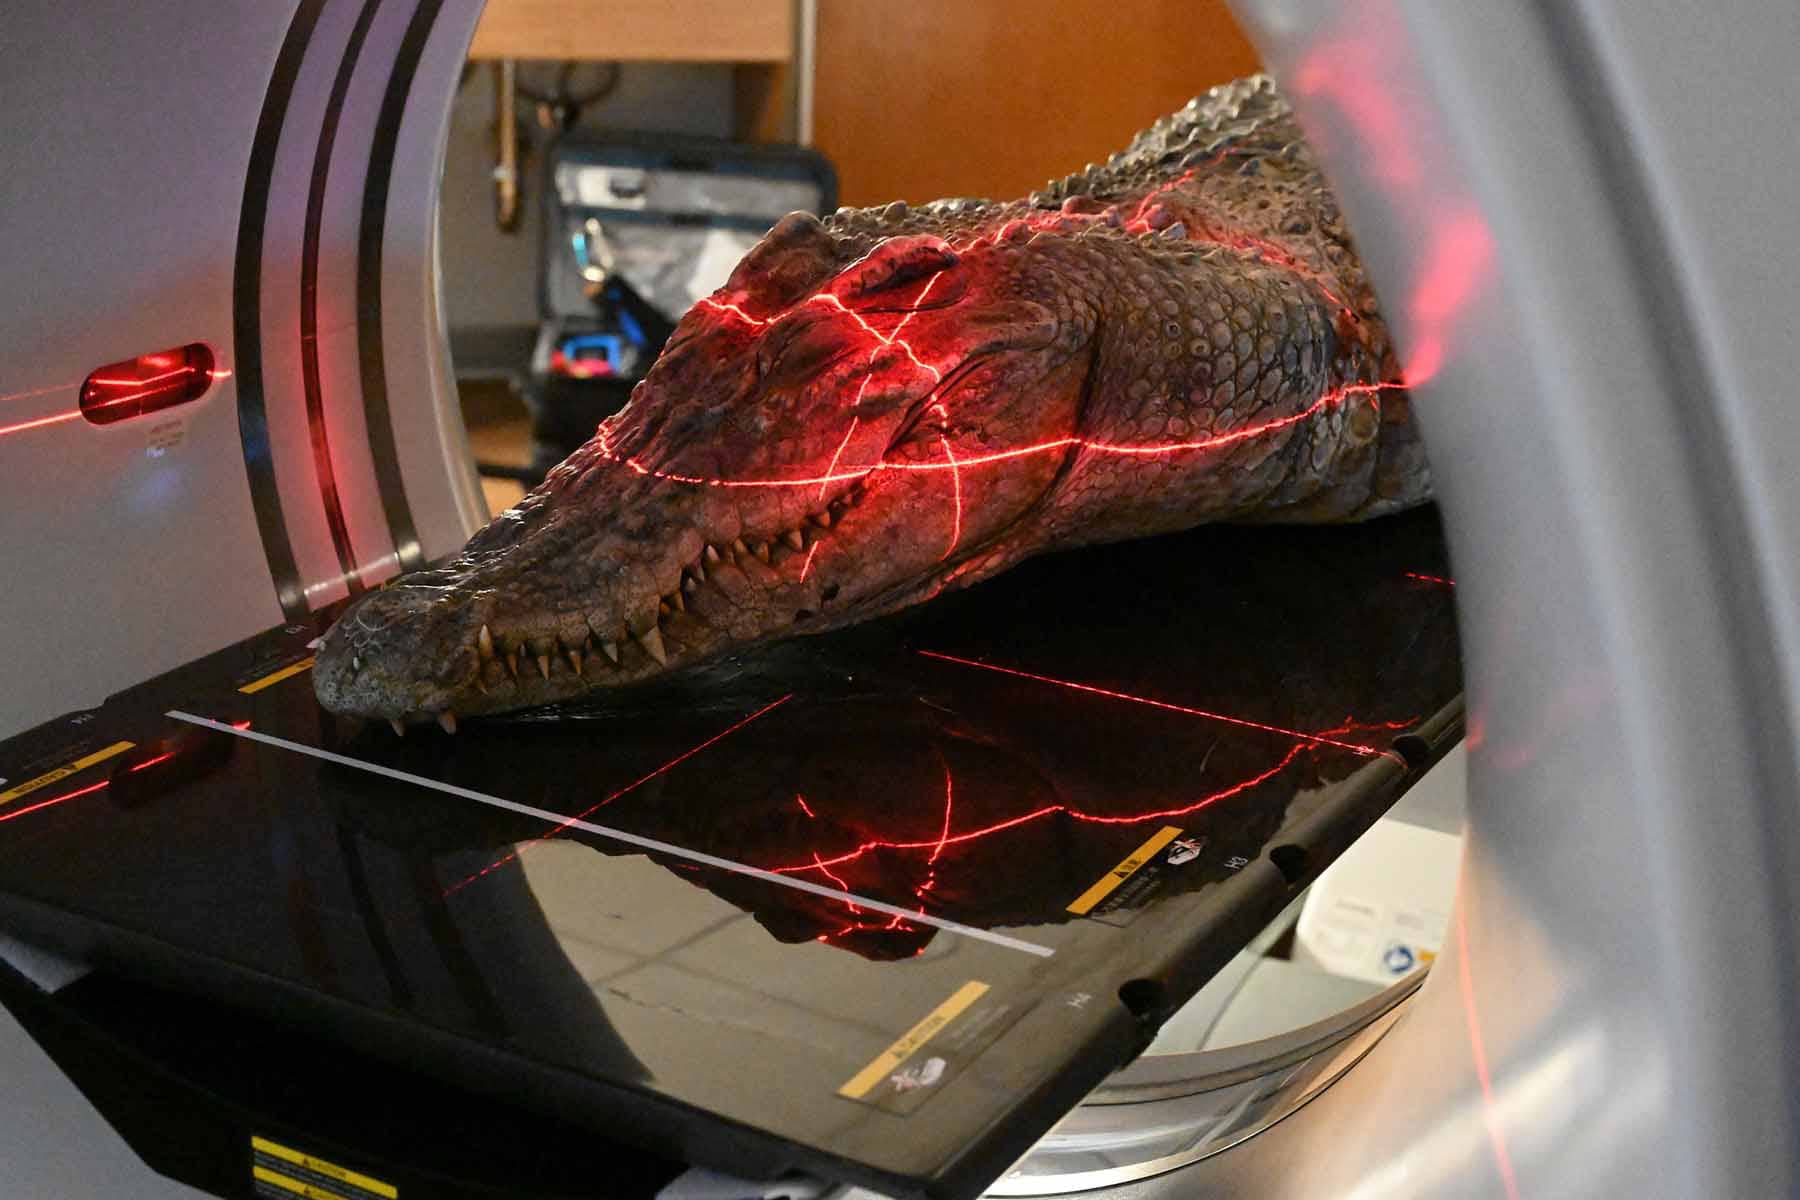 Witmer's team scans a crocodile at OhioHealth O'Bleness Hospital. Witmer’s work, involving doing CT scans of fossils, was featured in National Geographic in 2020.